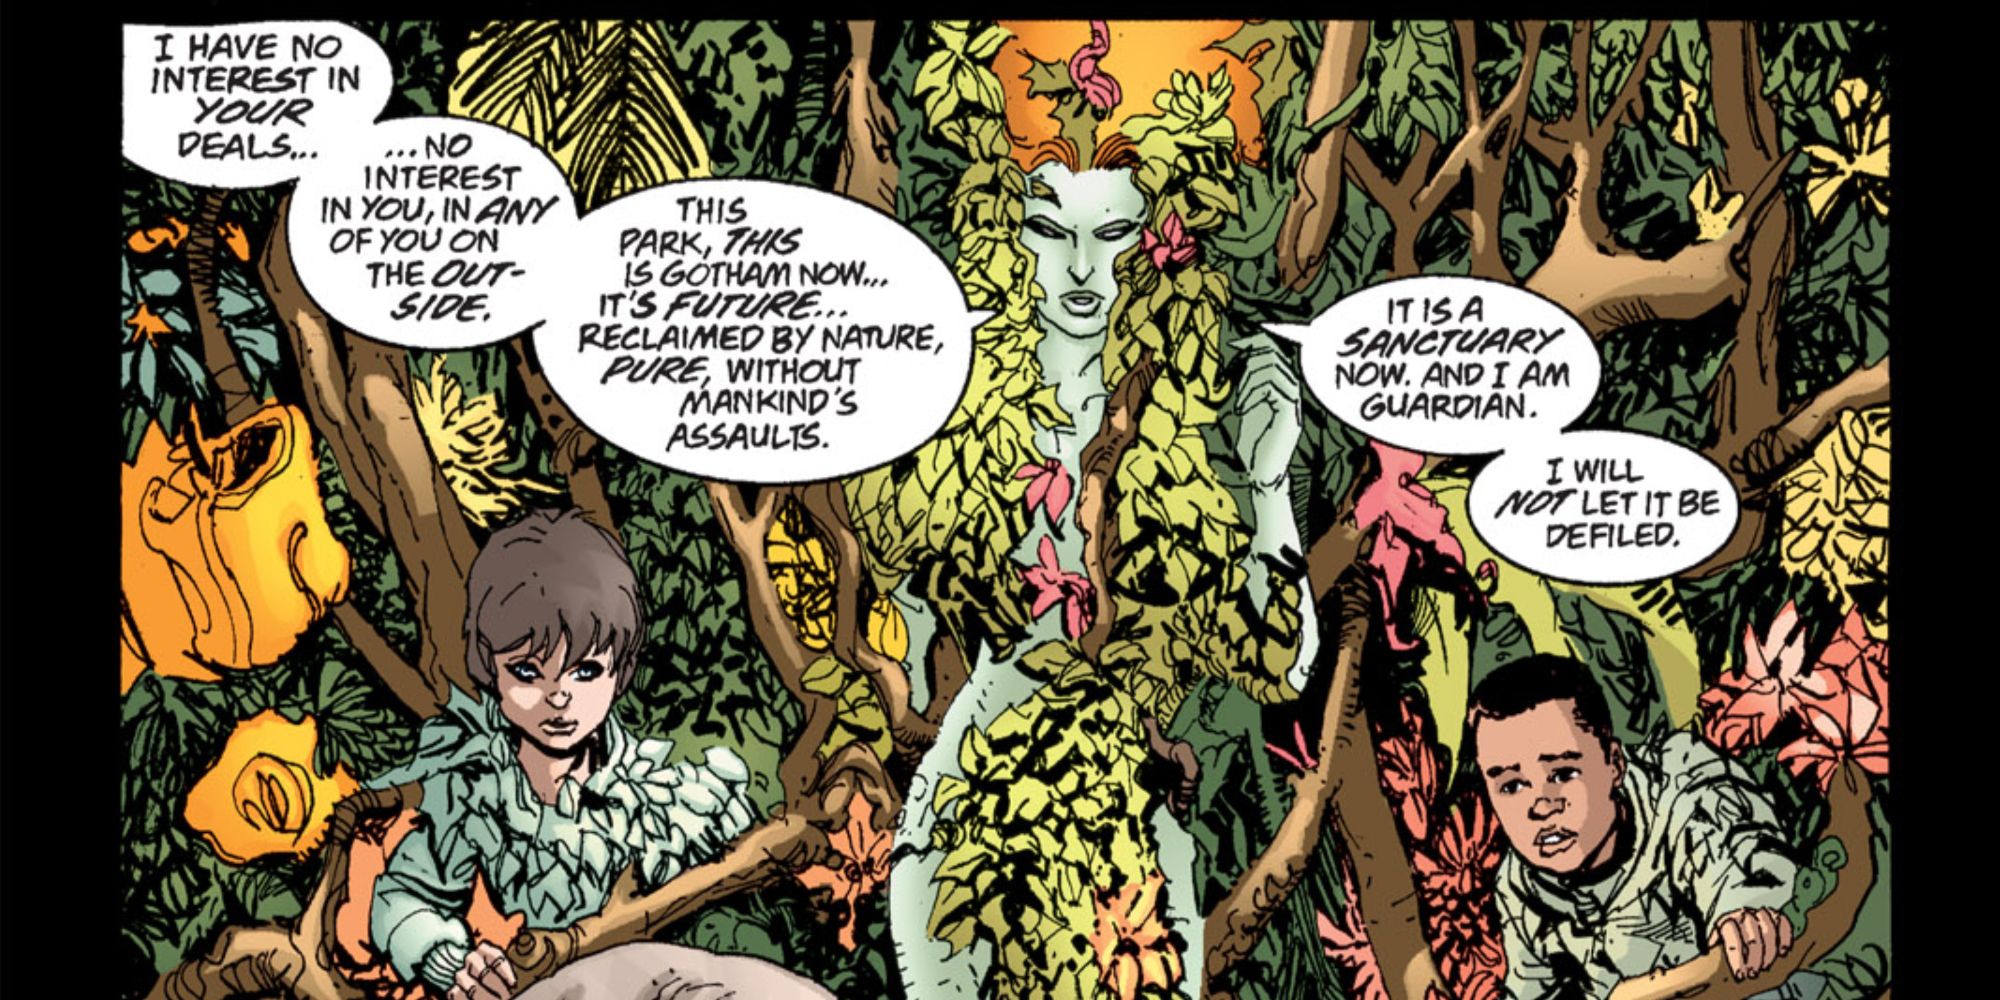 Poison Ivy claims Gotham in No Man's Land comic.